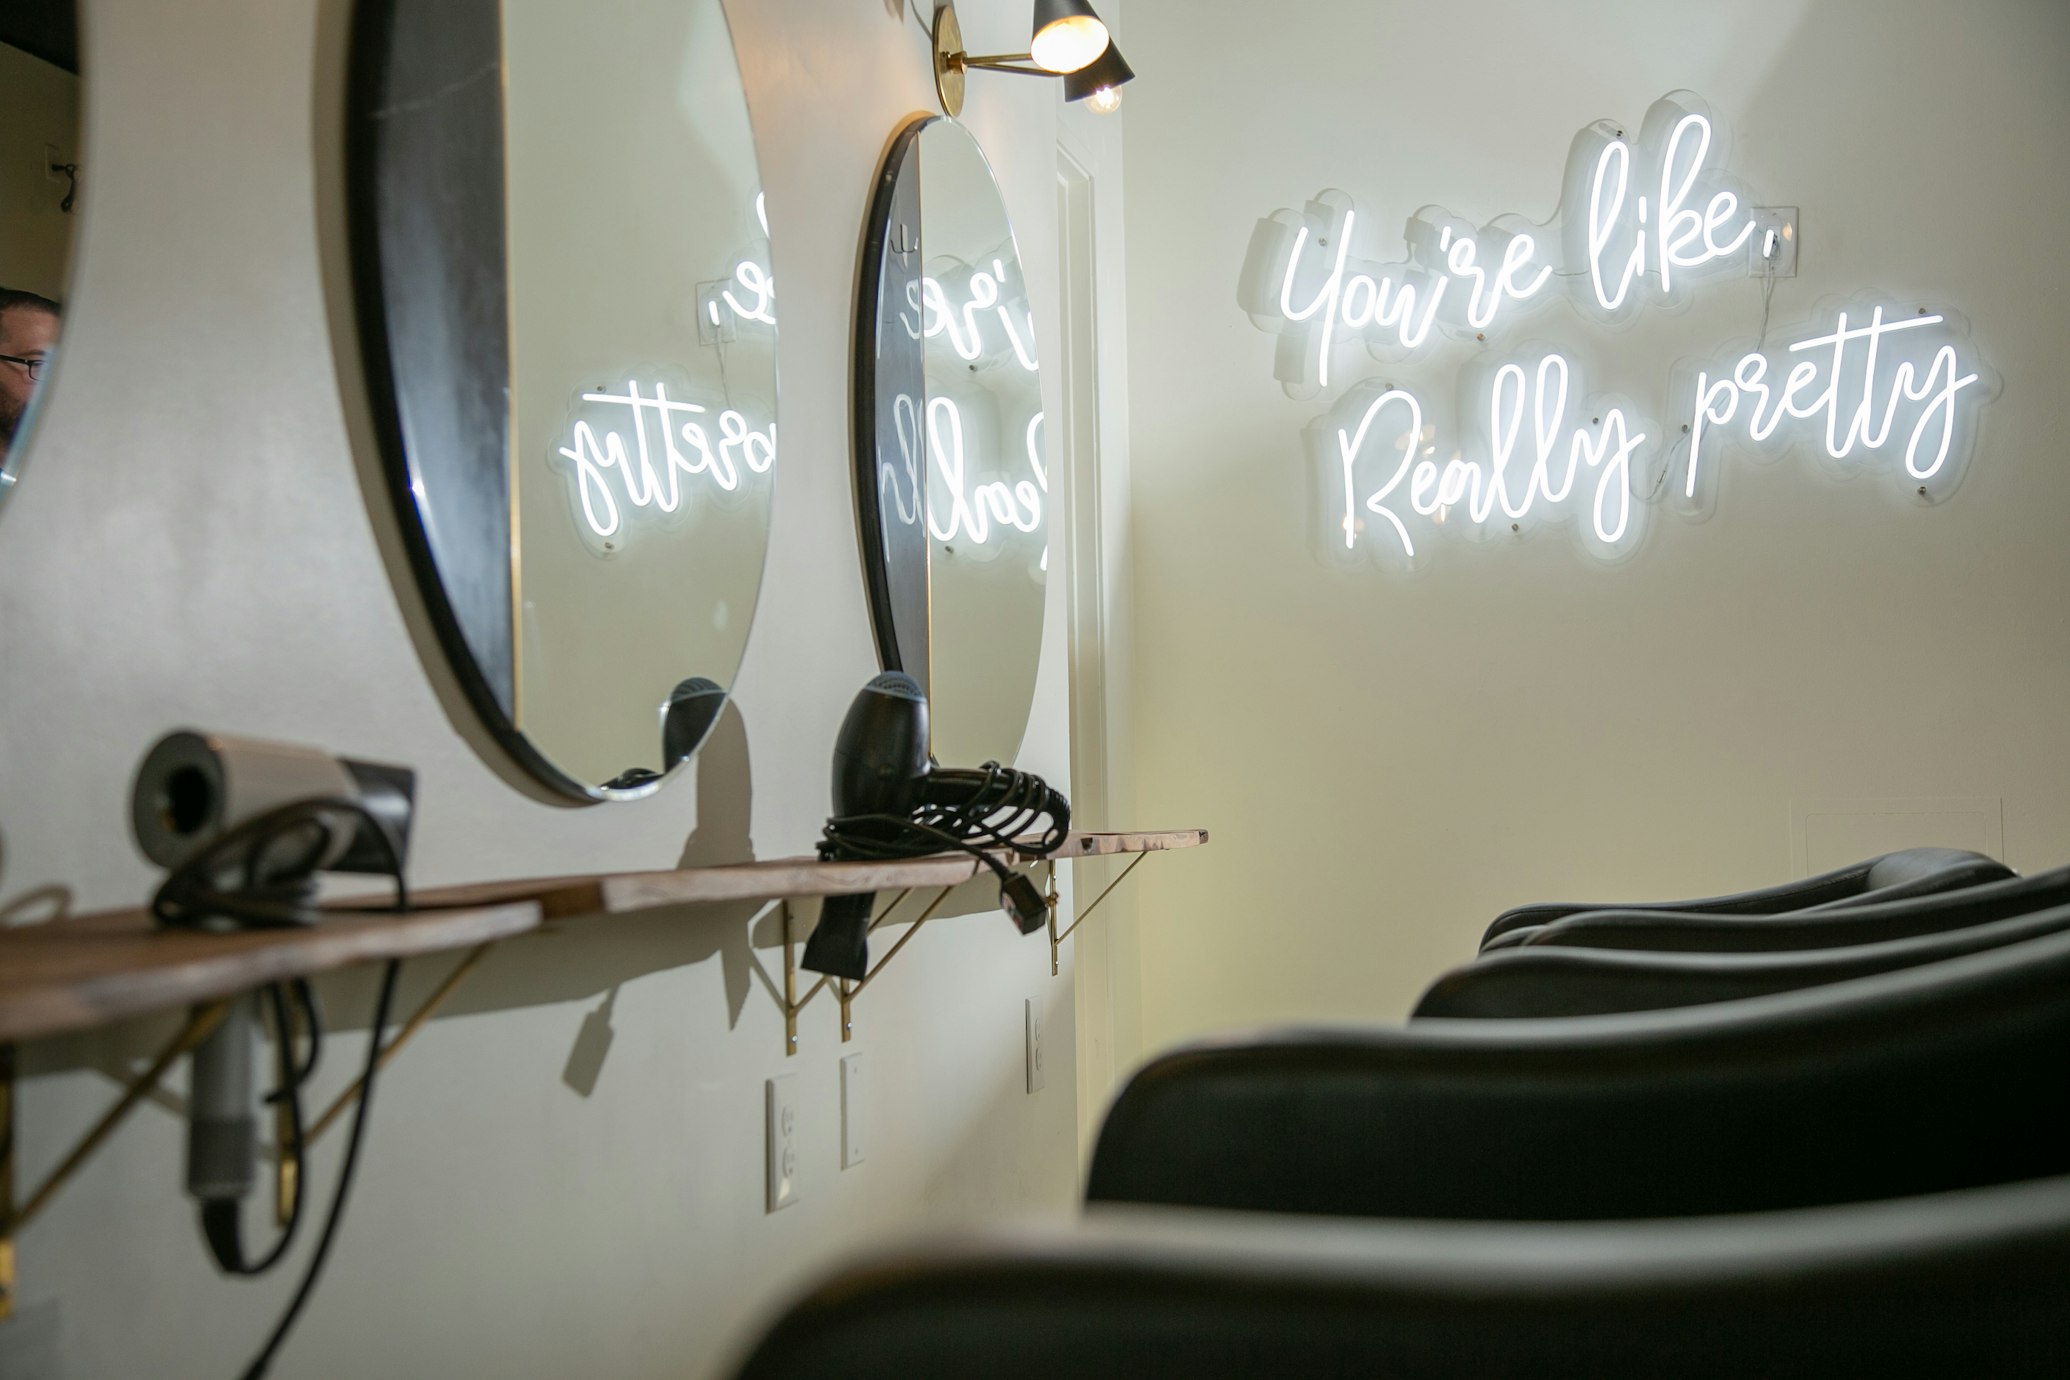 A photo of the interior of a hair salon with a neon sign on the wall that says "You're like, really pretty."